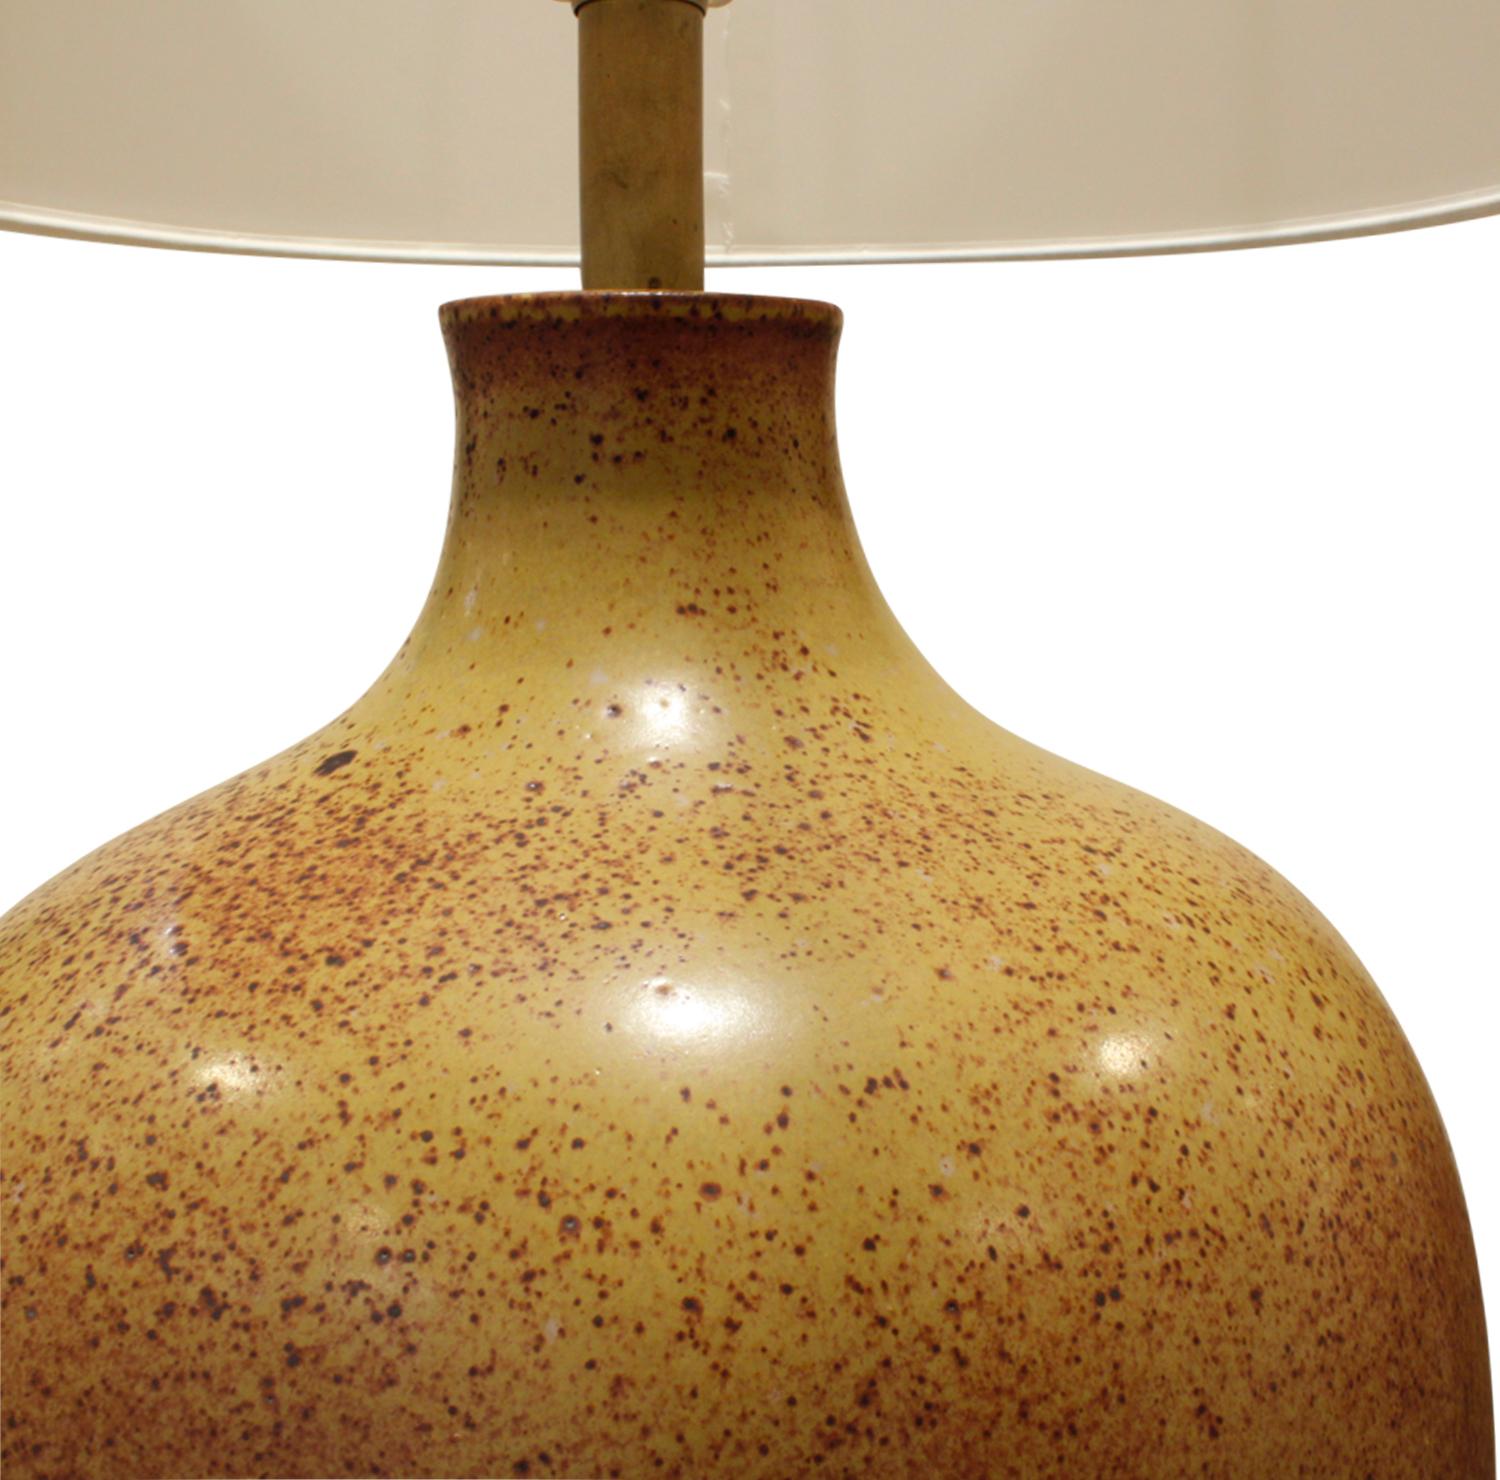 Large studio made ceramic table lamp with complex speckled glaze by David Cressey, American 1960s. This is an exceptional example of his work.

Shade diameter: 15 inches.